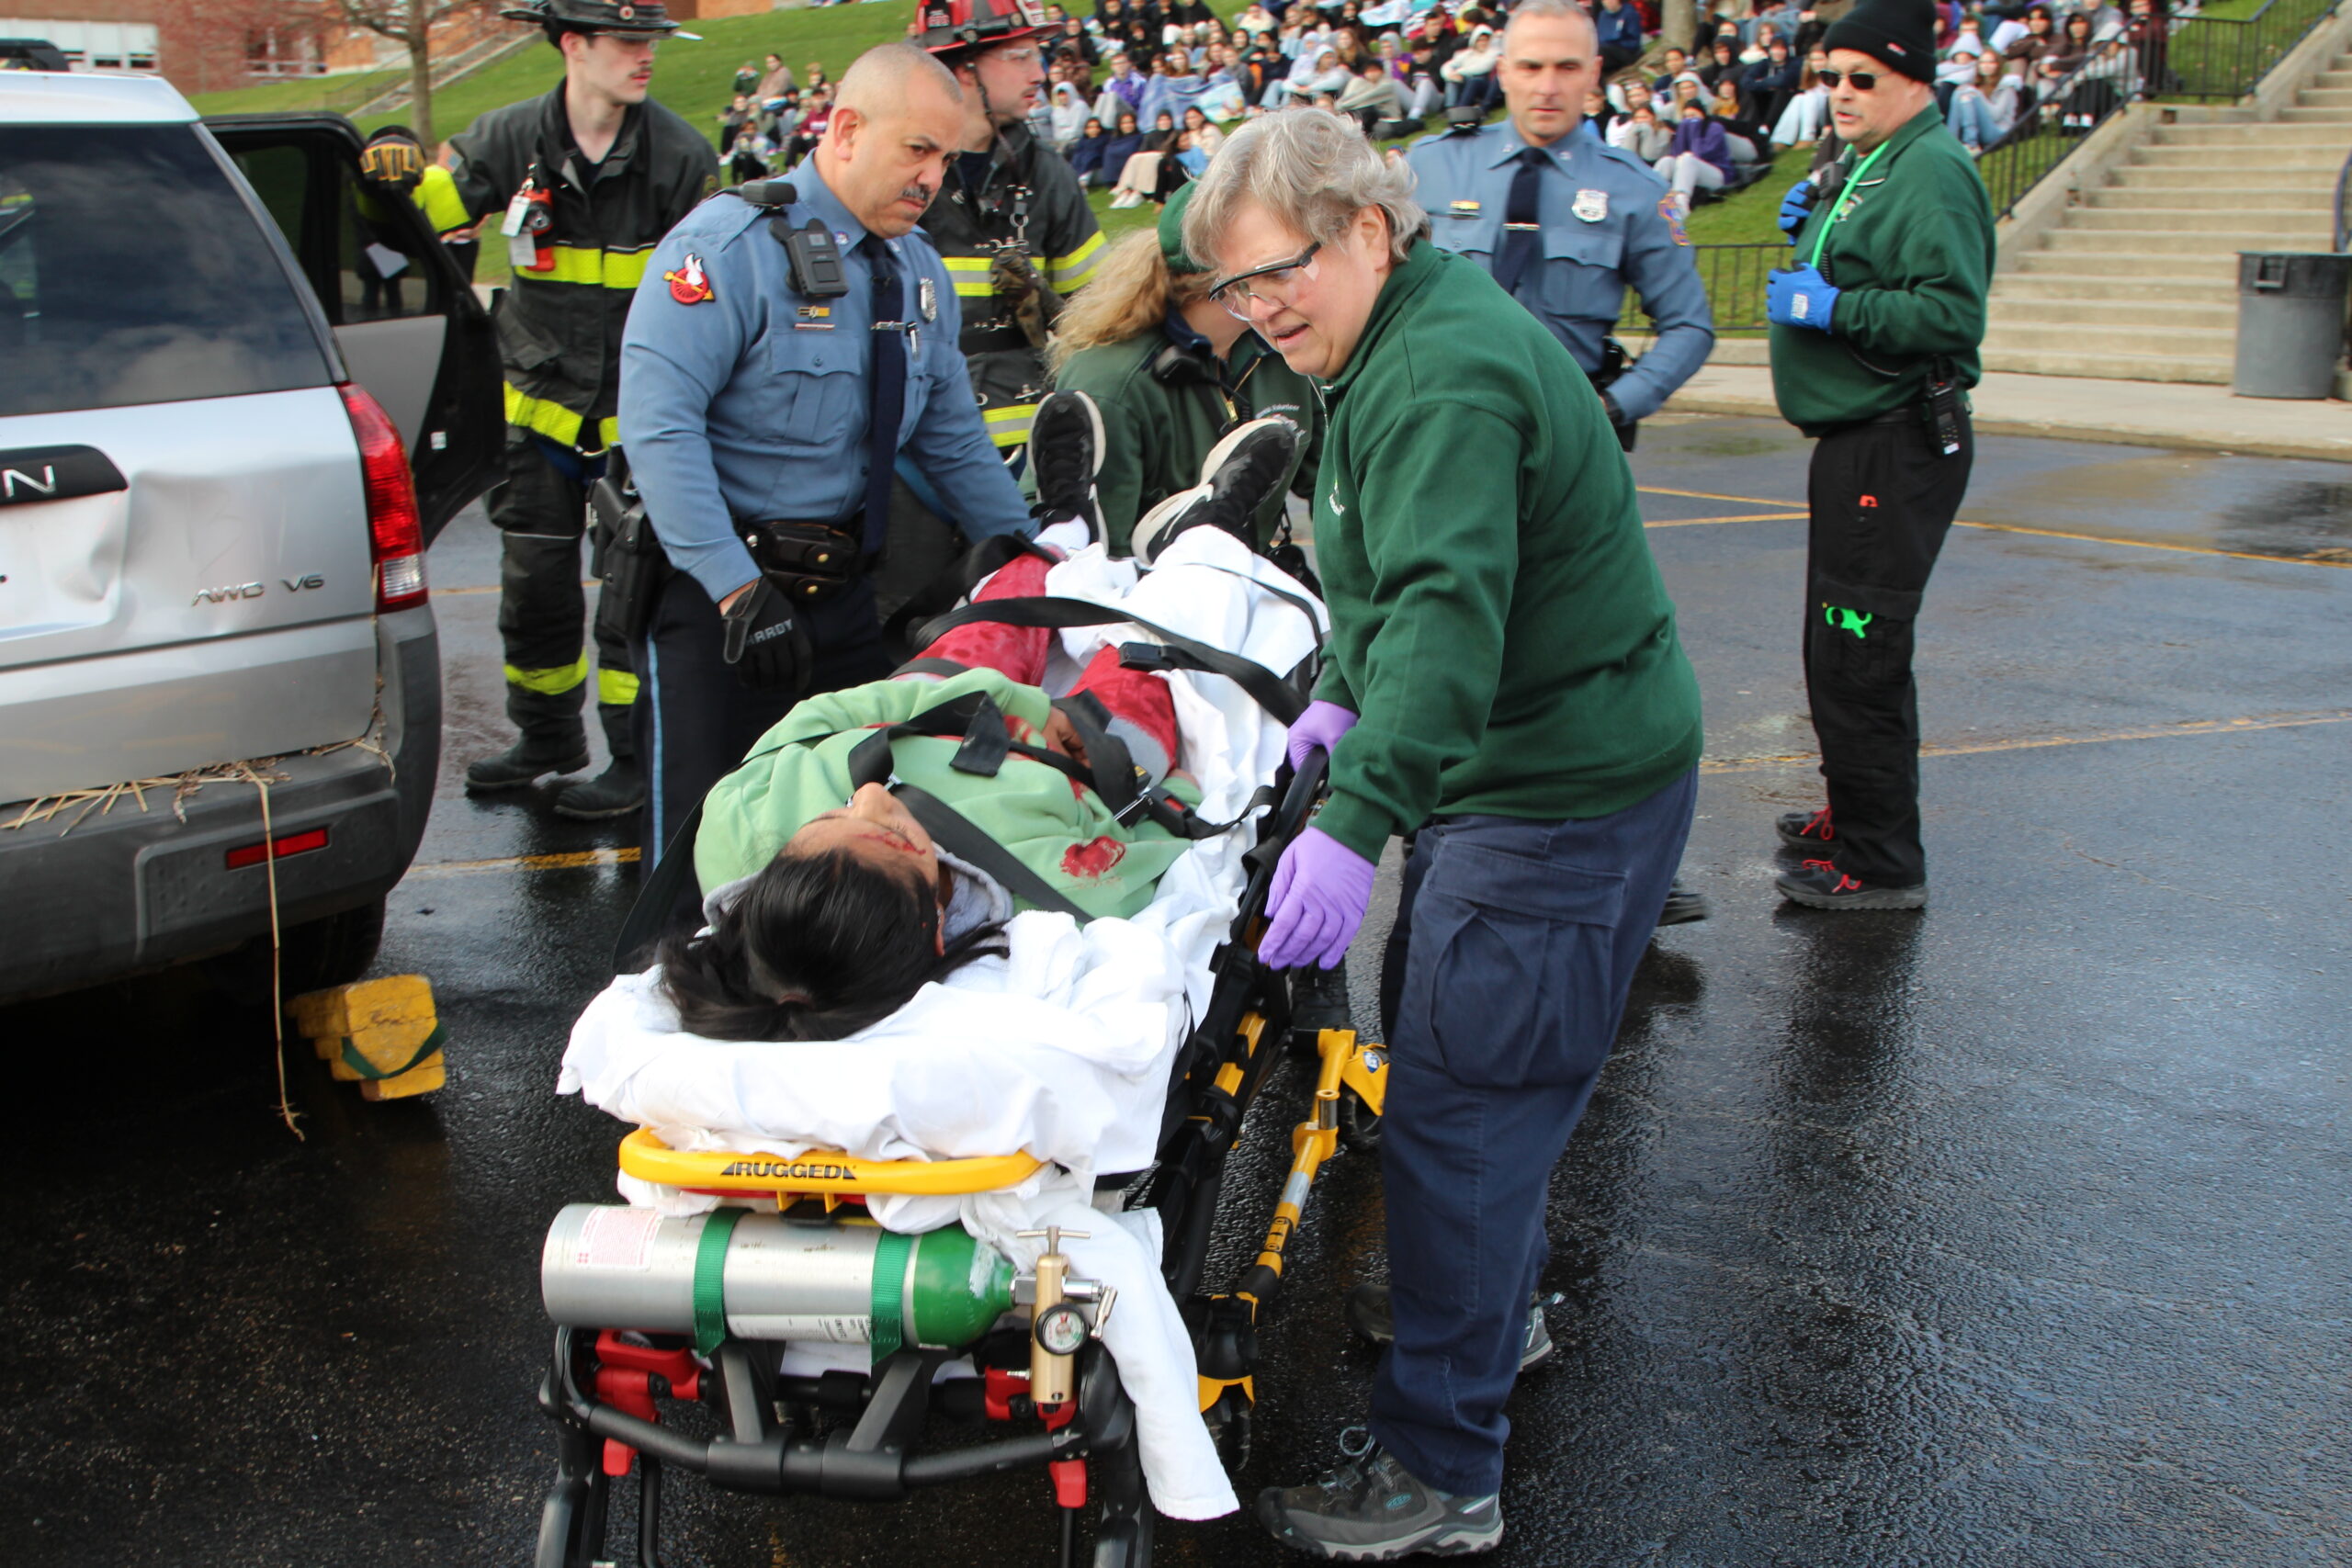 A student is transported to an ambulance in a mock crash event along with a police officer and an EMT